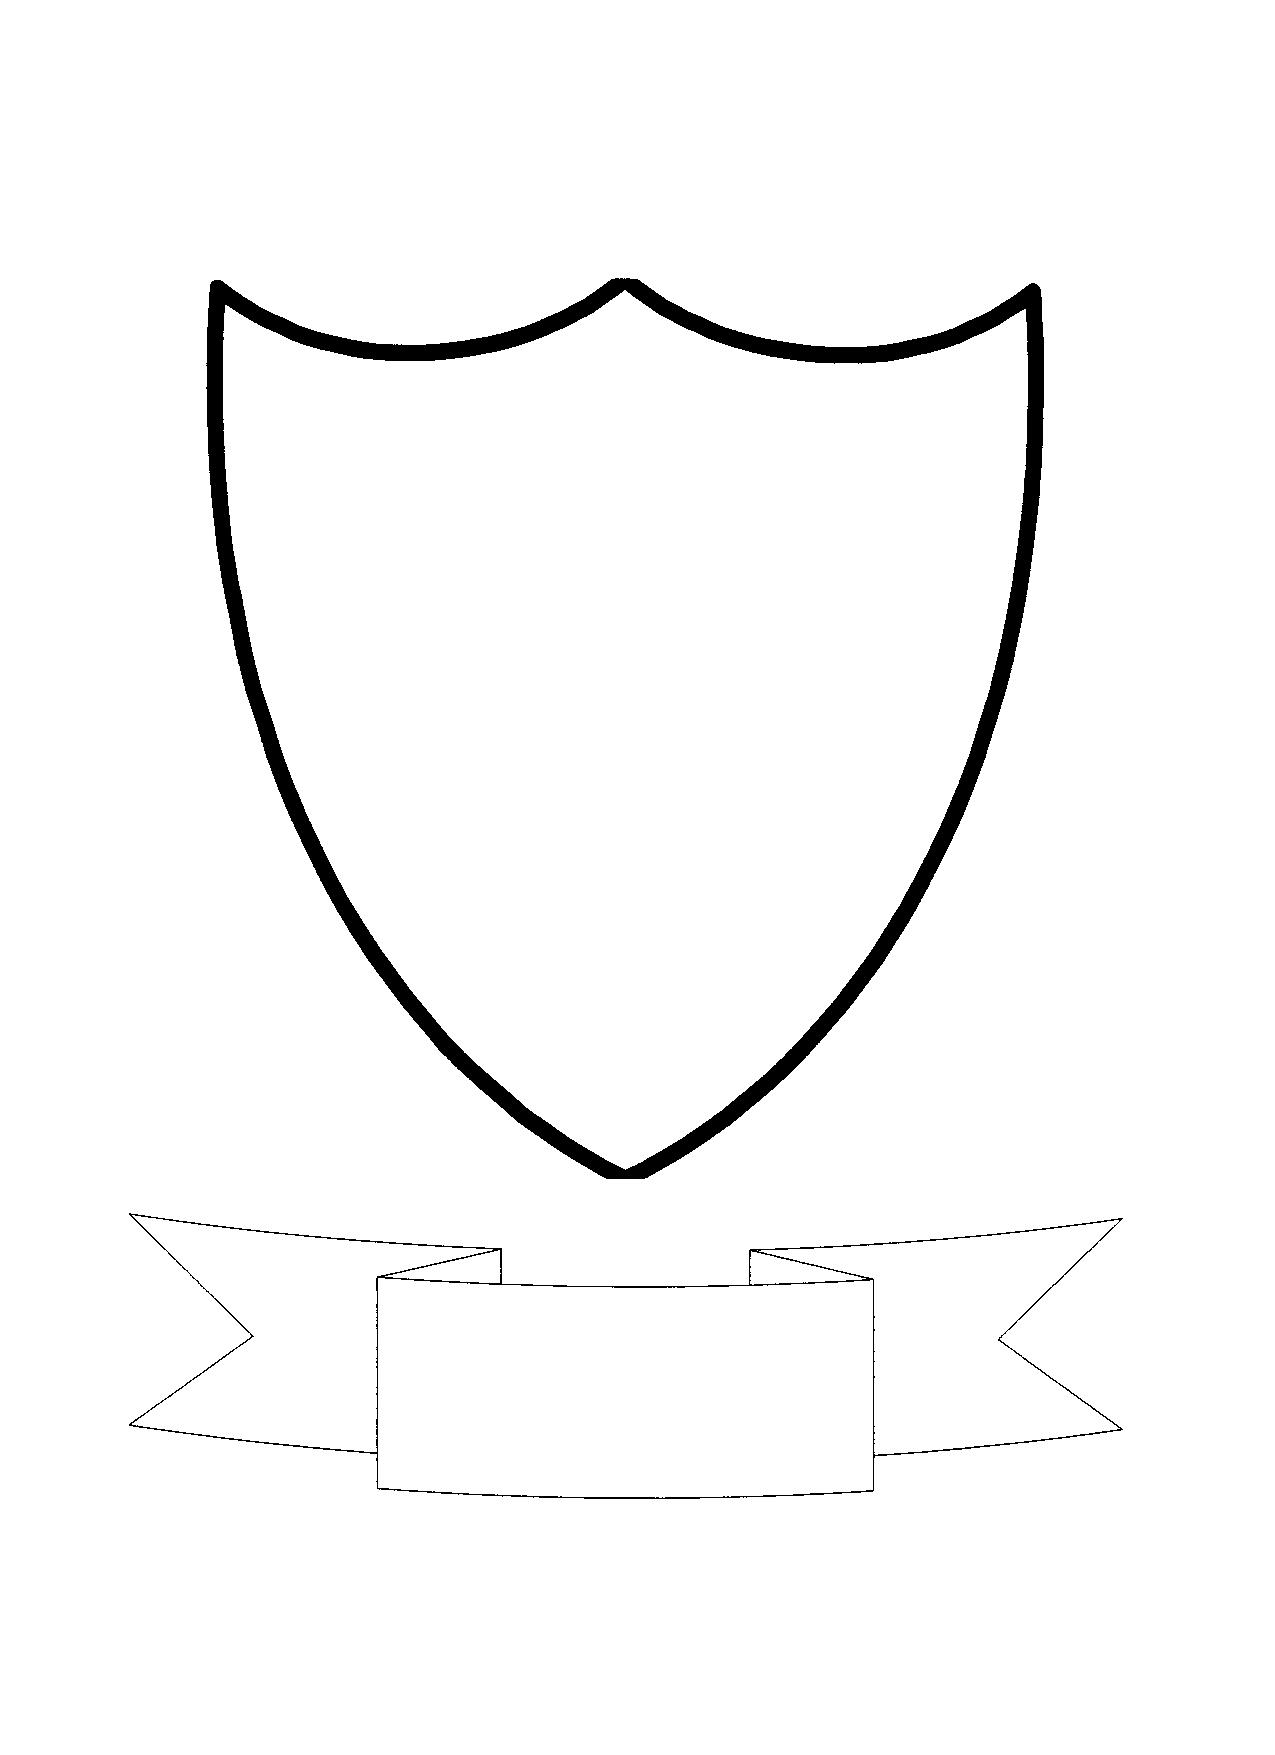 Coat Of Arms Template - Clipart library